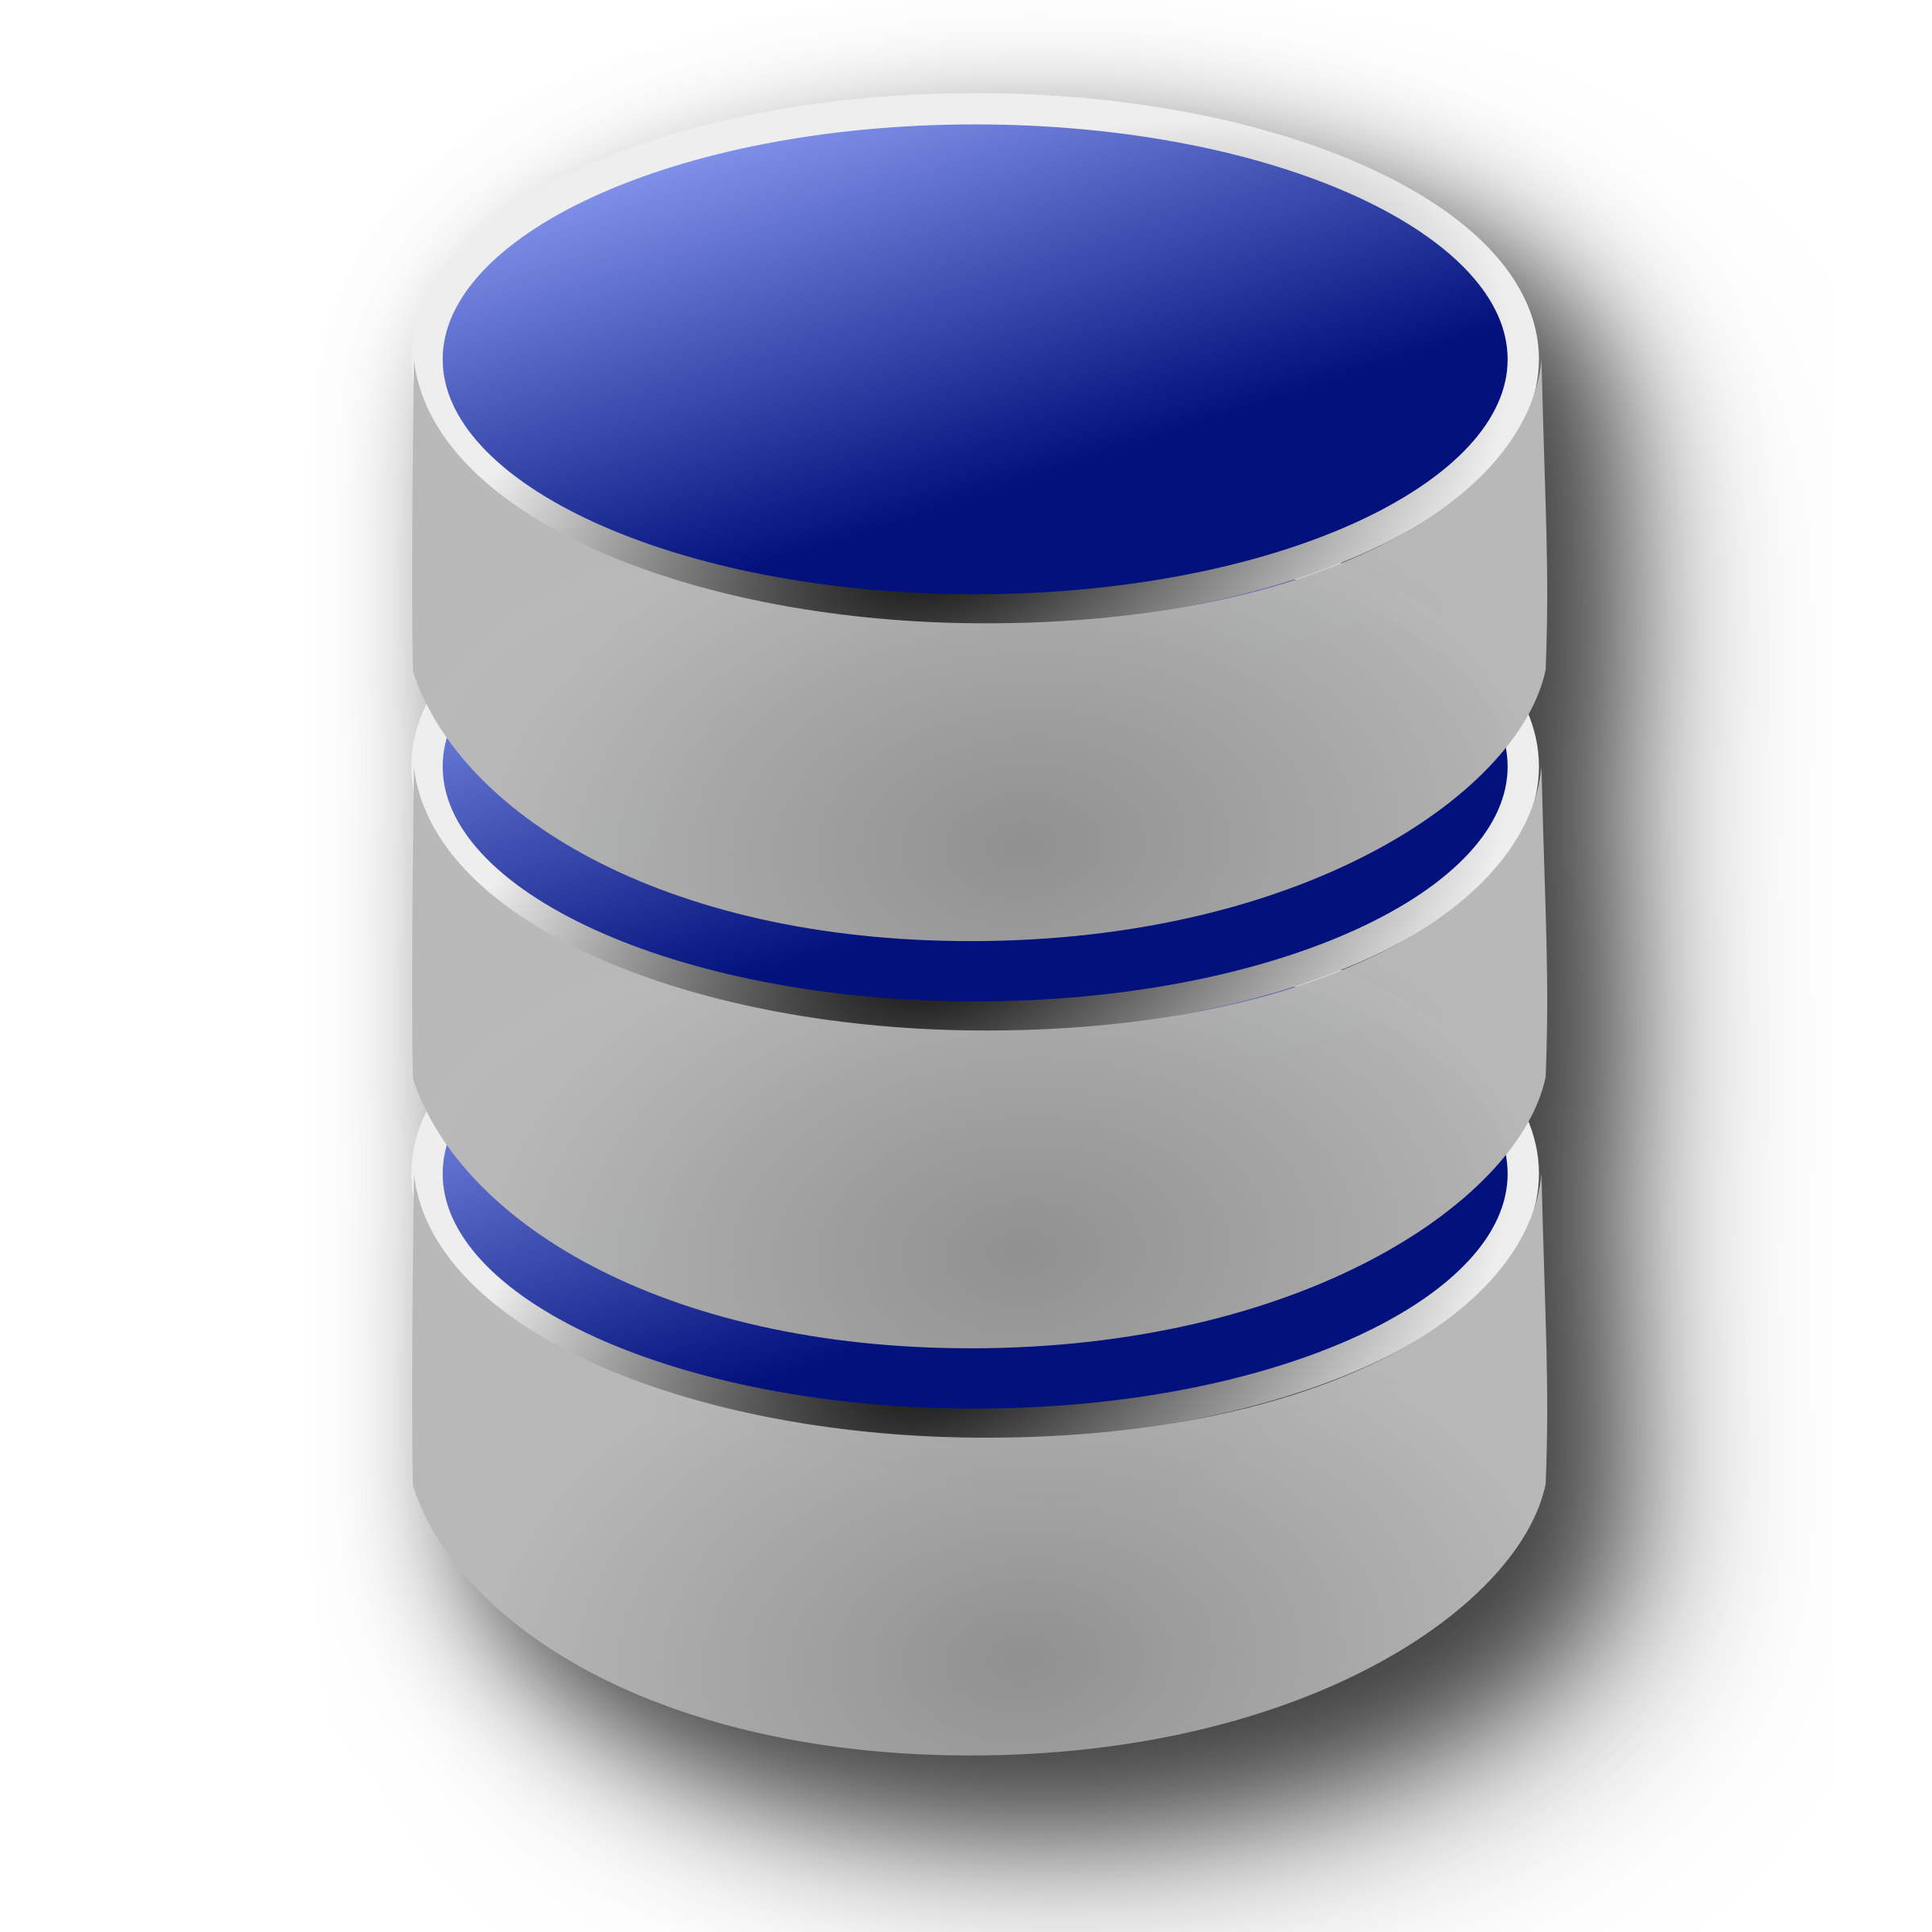 database server icon png